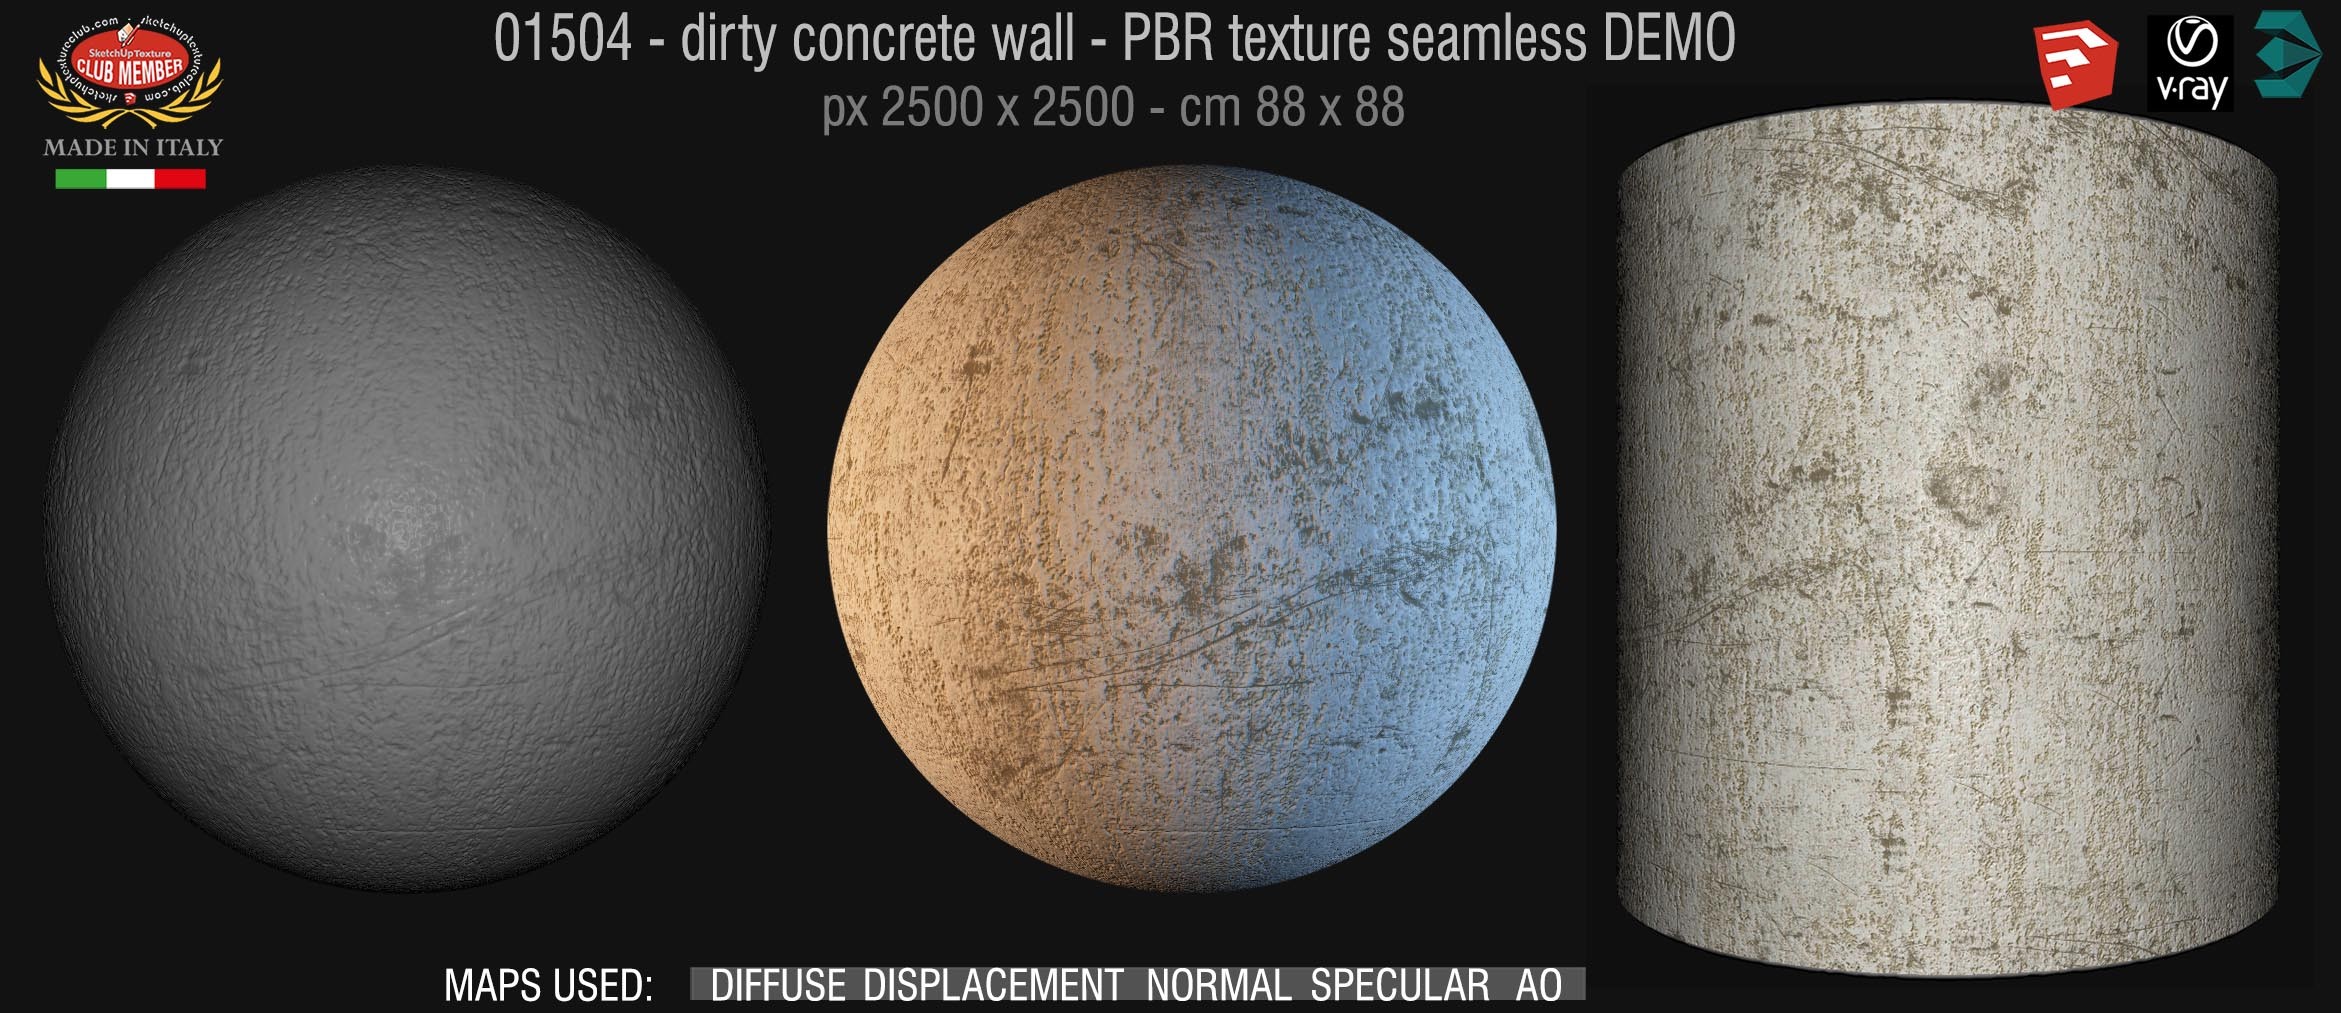 01504 Concrete bare dirty wall PBR texture seamless DEMO